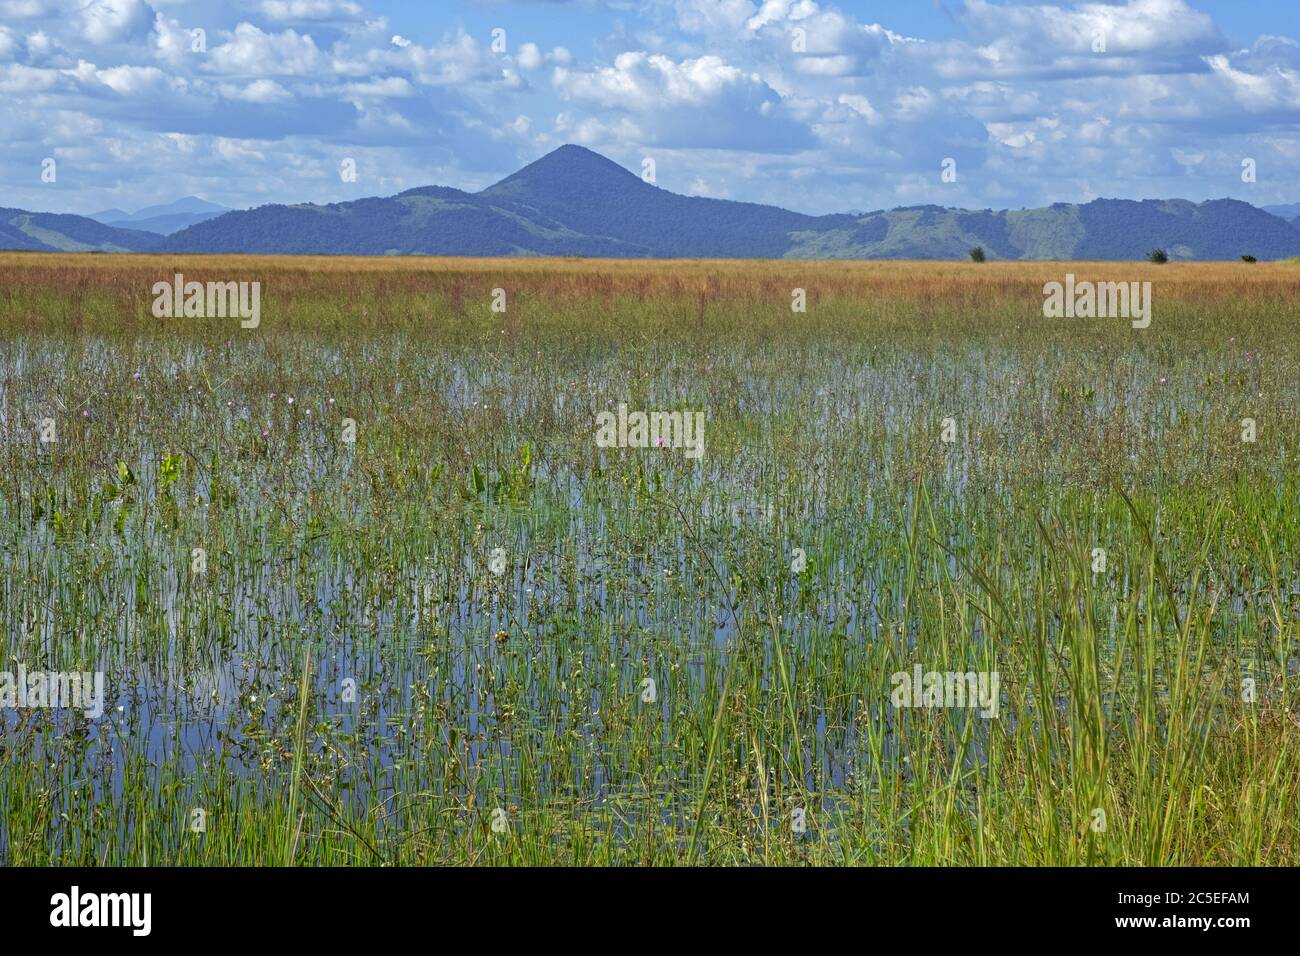 Marshland / swamp along the Linden-Lethem dirt road linking Lethem and Georgetown through the savanna, Guyana, South America Stock Photo